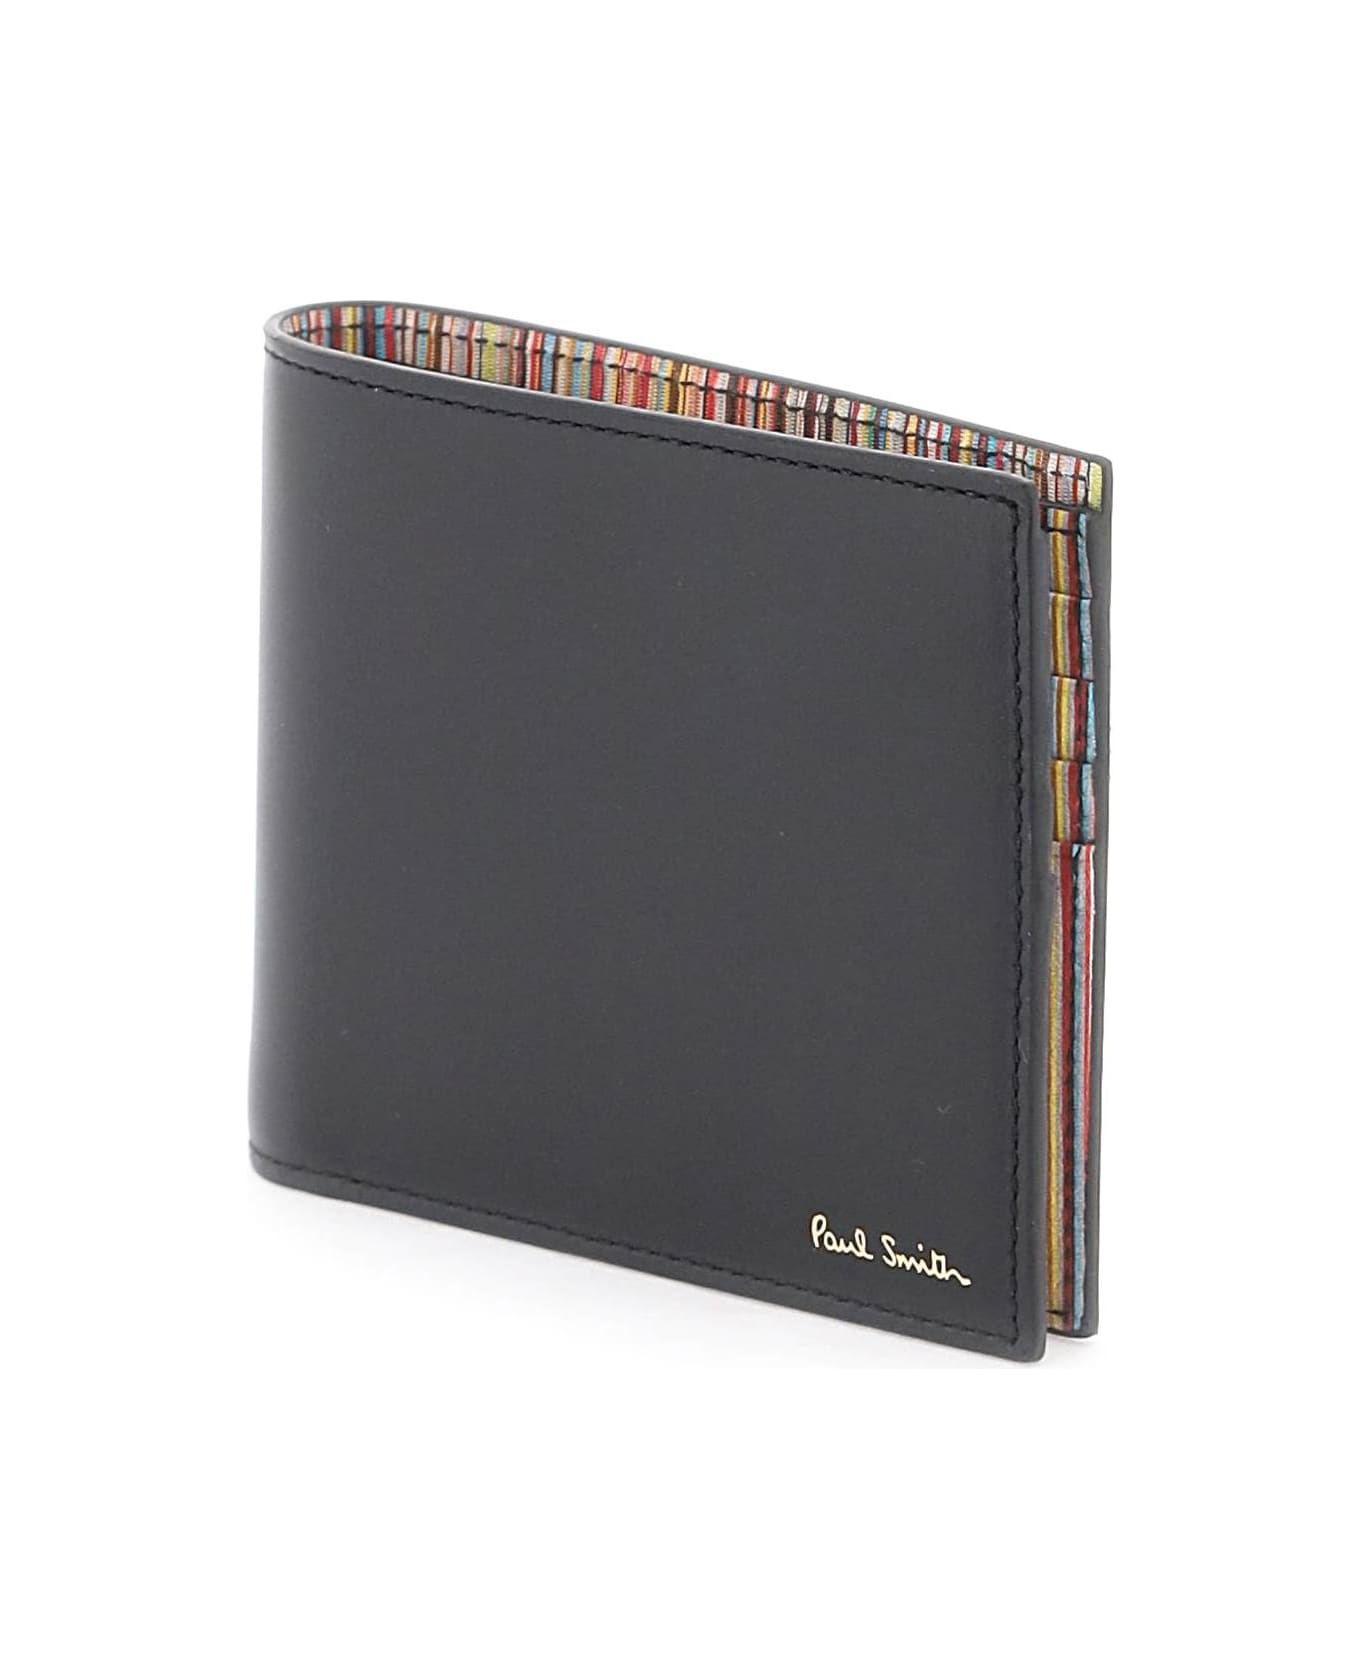 PS by Paul Smith 'signature Stripe' Wallet - Black 財布